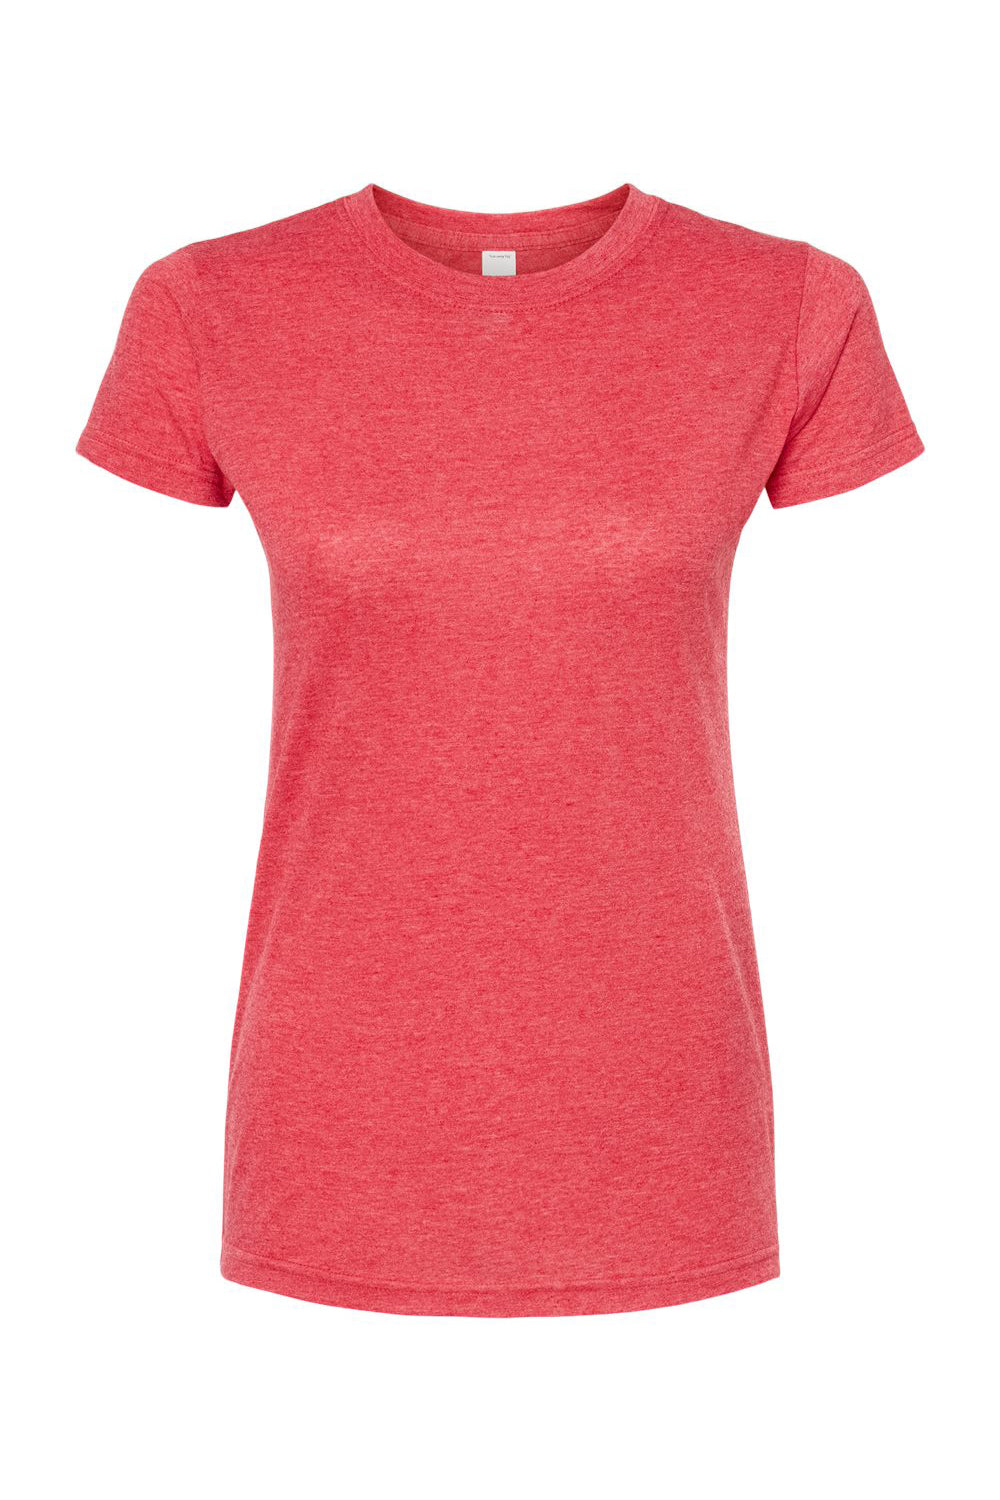 Tultex 240 Womens Poly-Rich Short Sleeve Crewneck T-Shirt Heather Red Flat Front